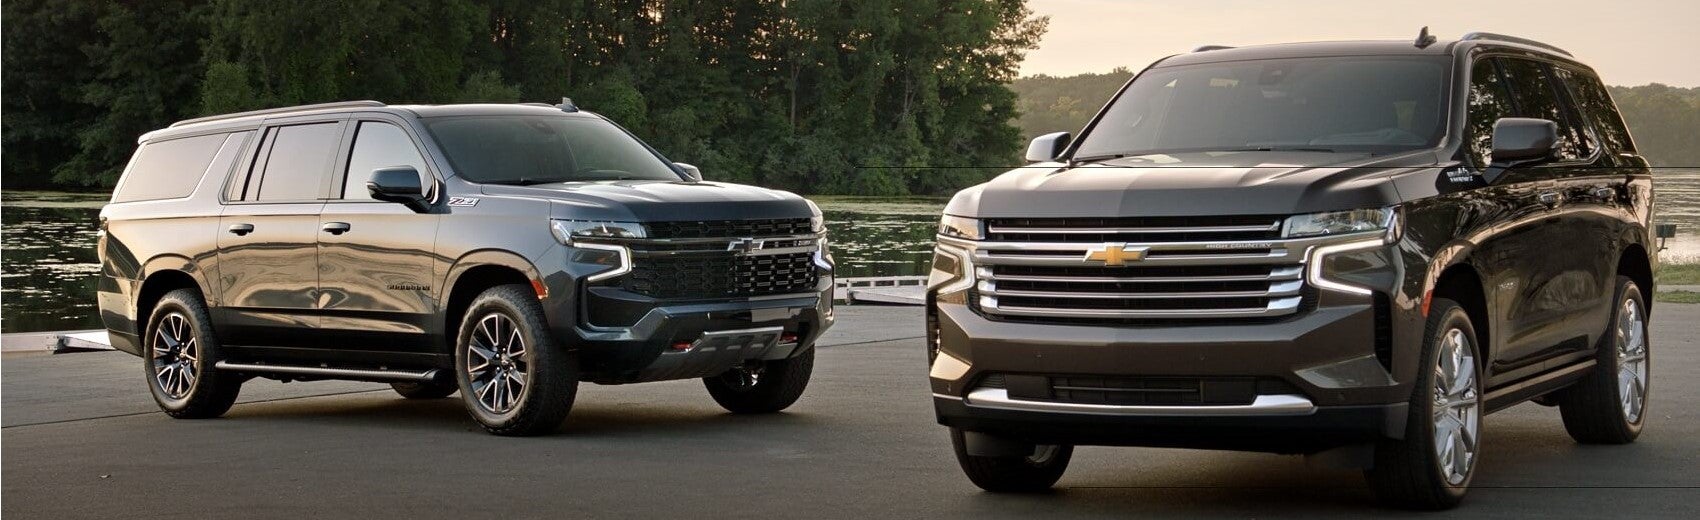 2022 Chevrolet Suburban Snipped